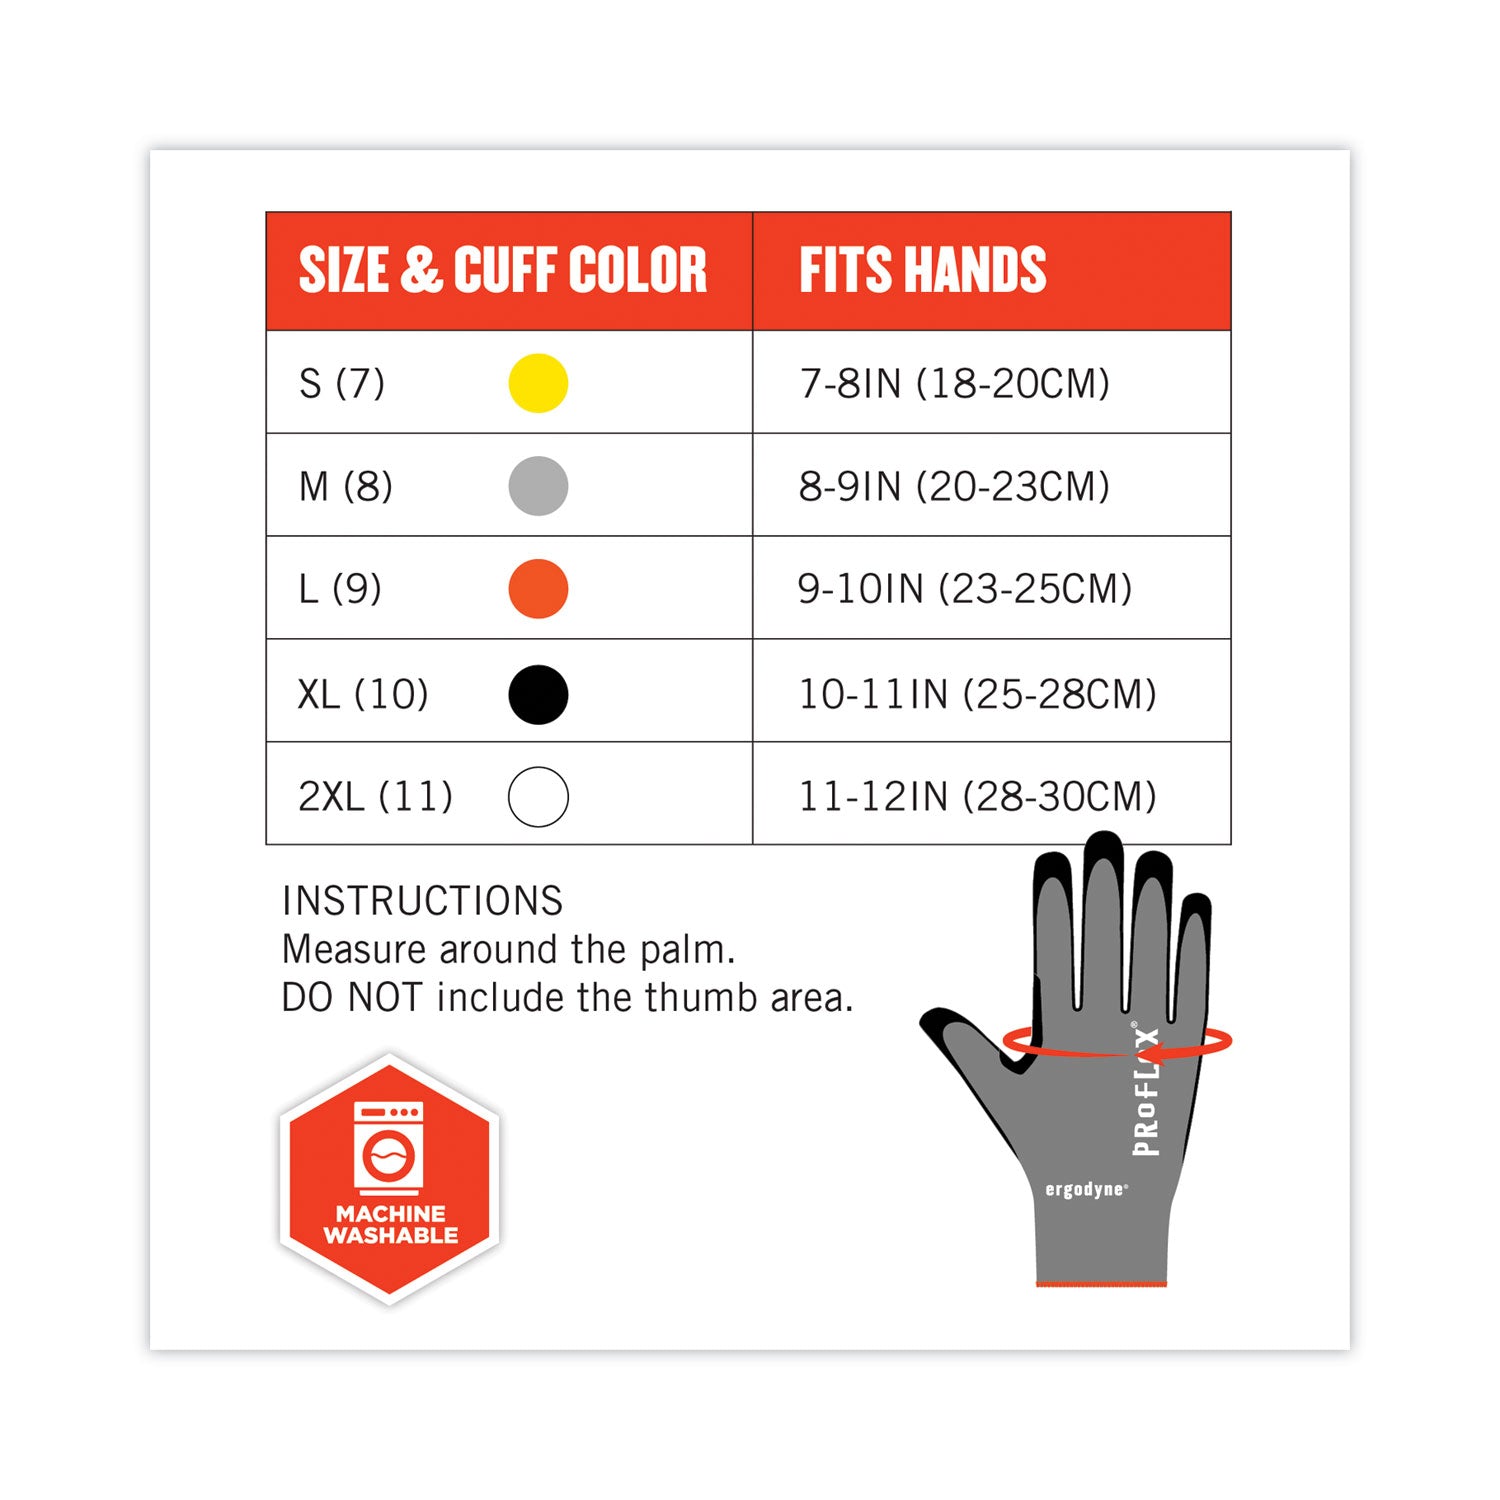 proflex-7072-ansi-a7-nitrile-coated-cr-gloves-gray-small-pair-ships-in-1-3-business-days_ego10312 - 2